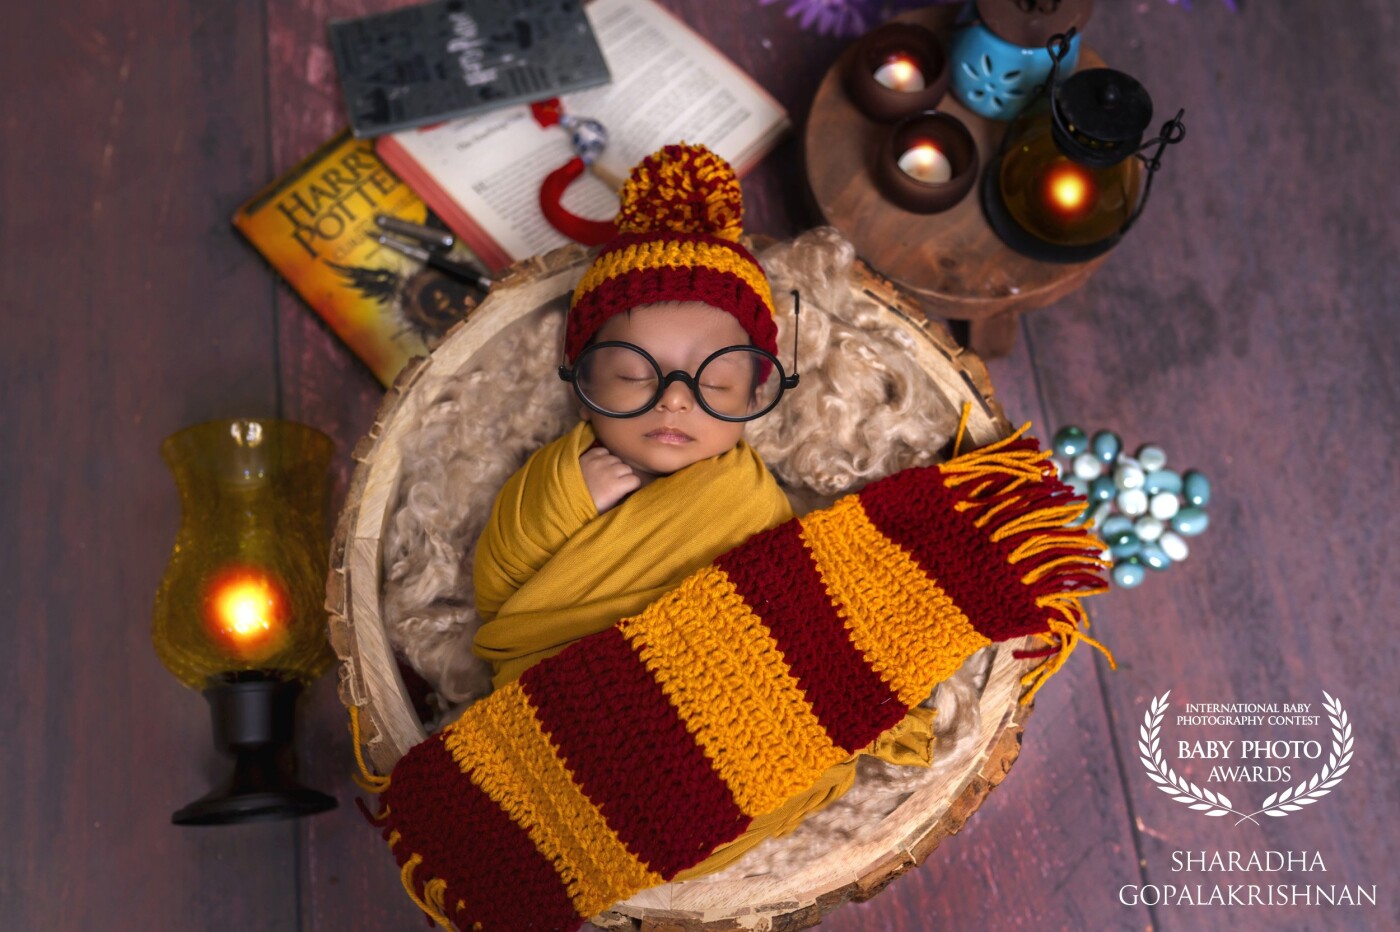 It was the mother of this little kiddo who wanted to do a Harry Potter shoot and that's my first try on harry, potter. Not just me, not just his mom, but everyone loved the output. I had to get everything ready in a day for this which was worth the effort! I was overwhelming with the aww people reacted to this image, indeed a push to create more and do more ❤️